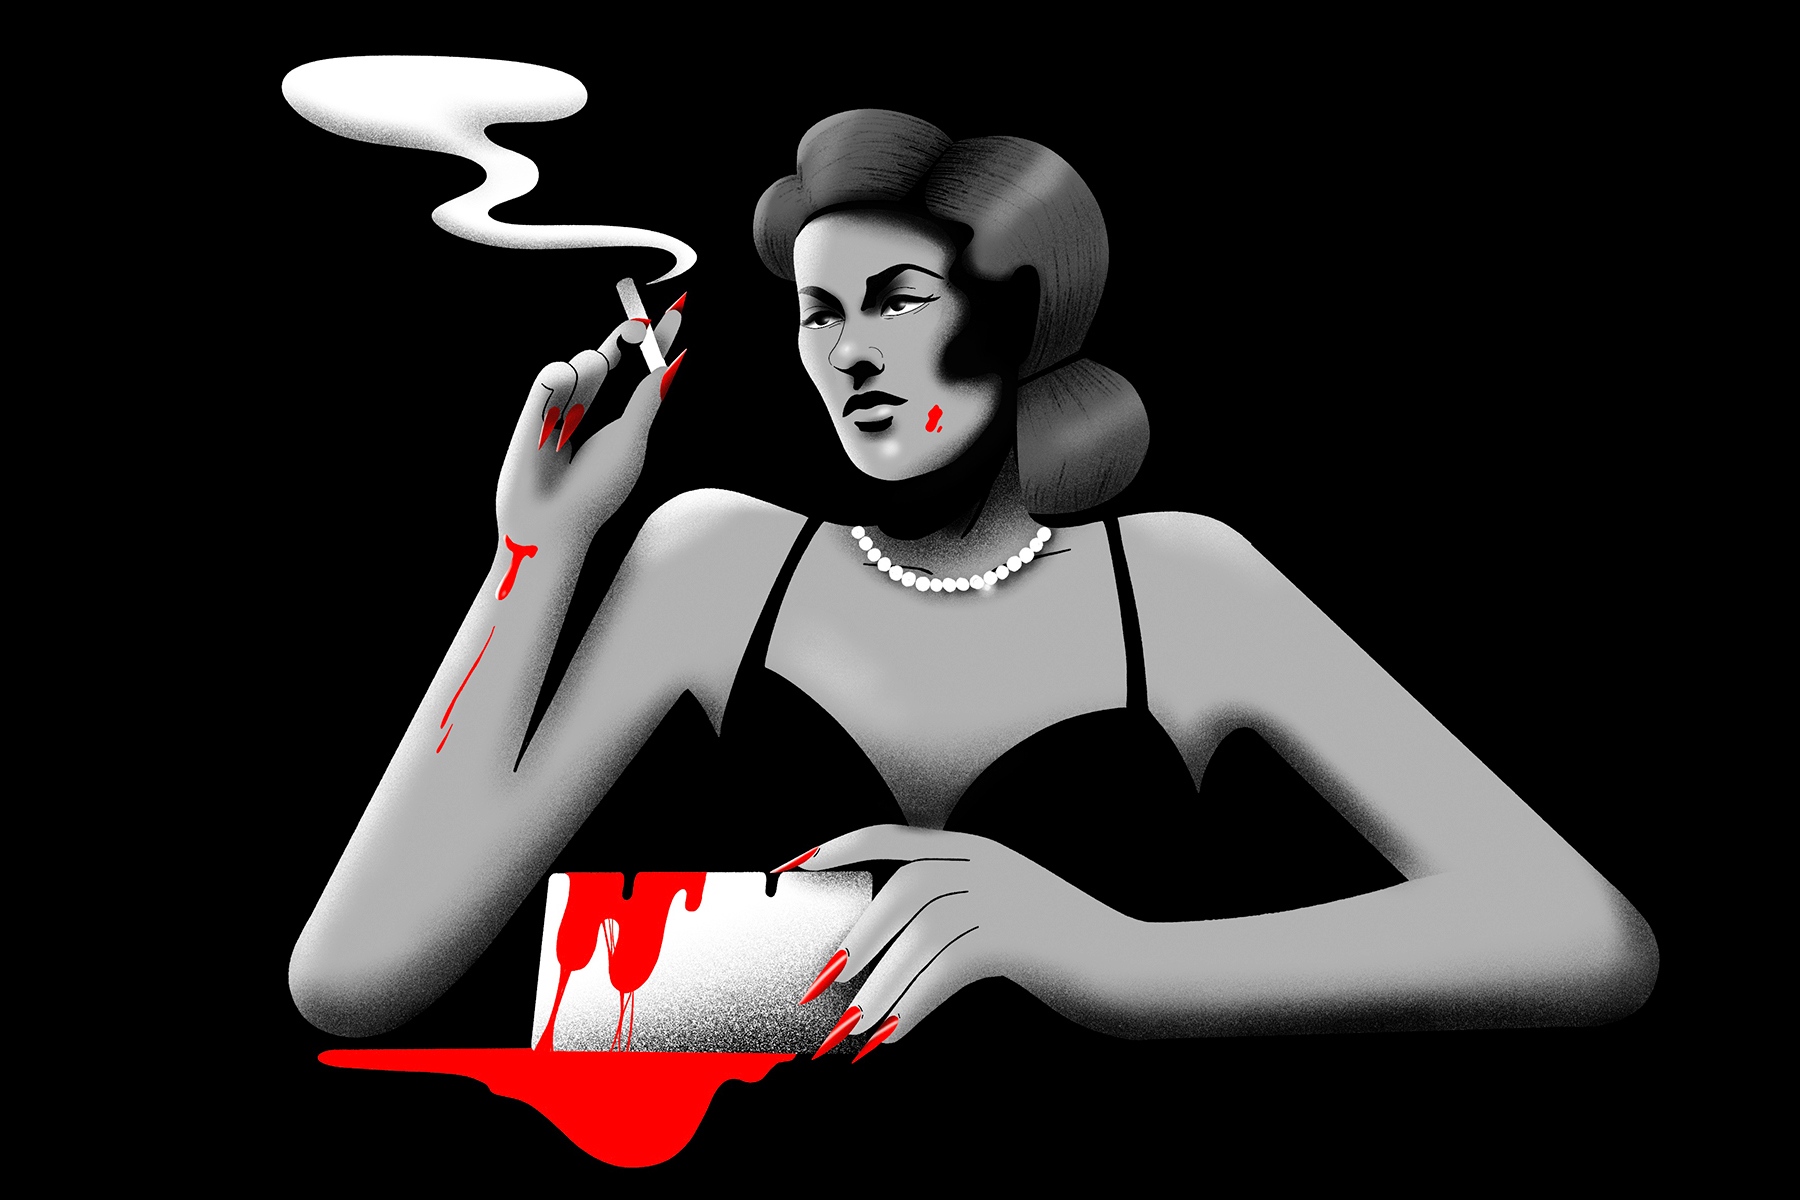 An illustration of a woman smoking a cigarette in black and white spattered in tiny blobs of red blood, holding a bloody ash tray.